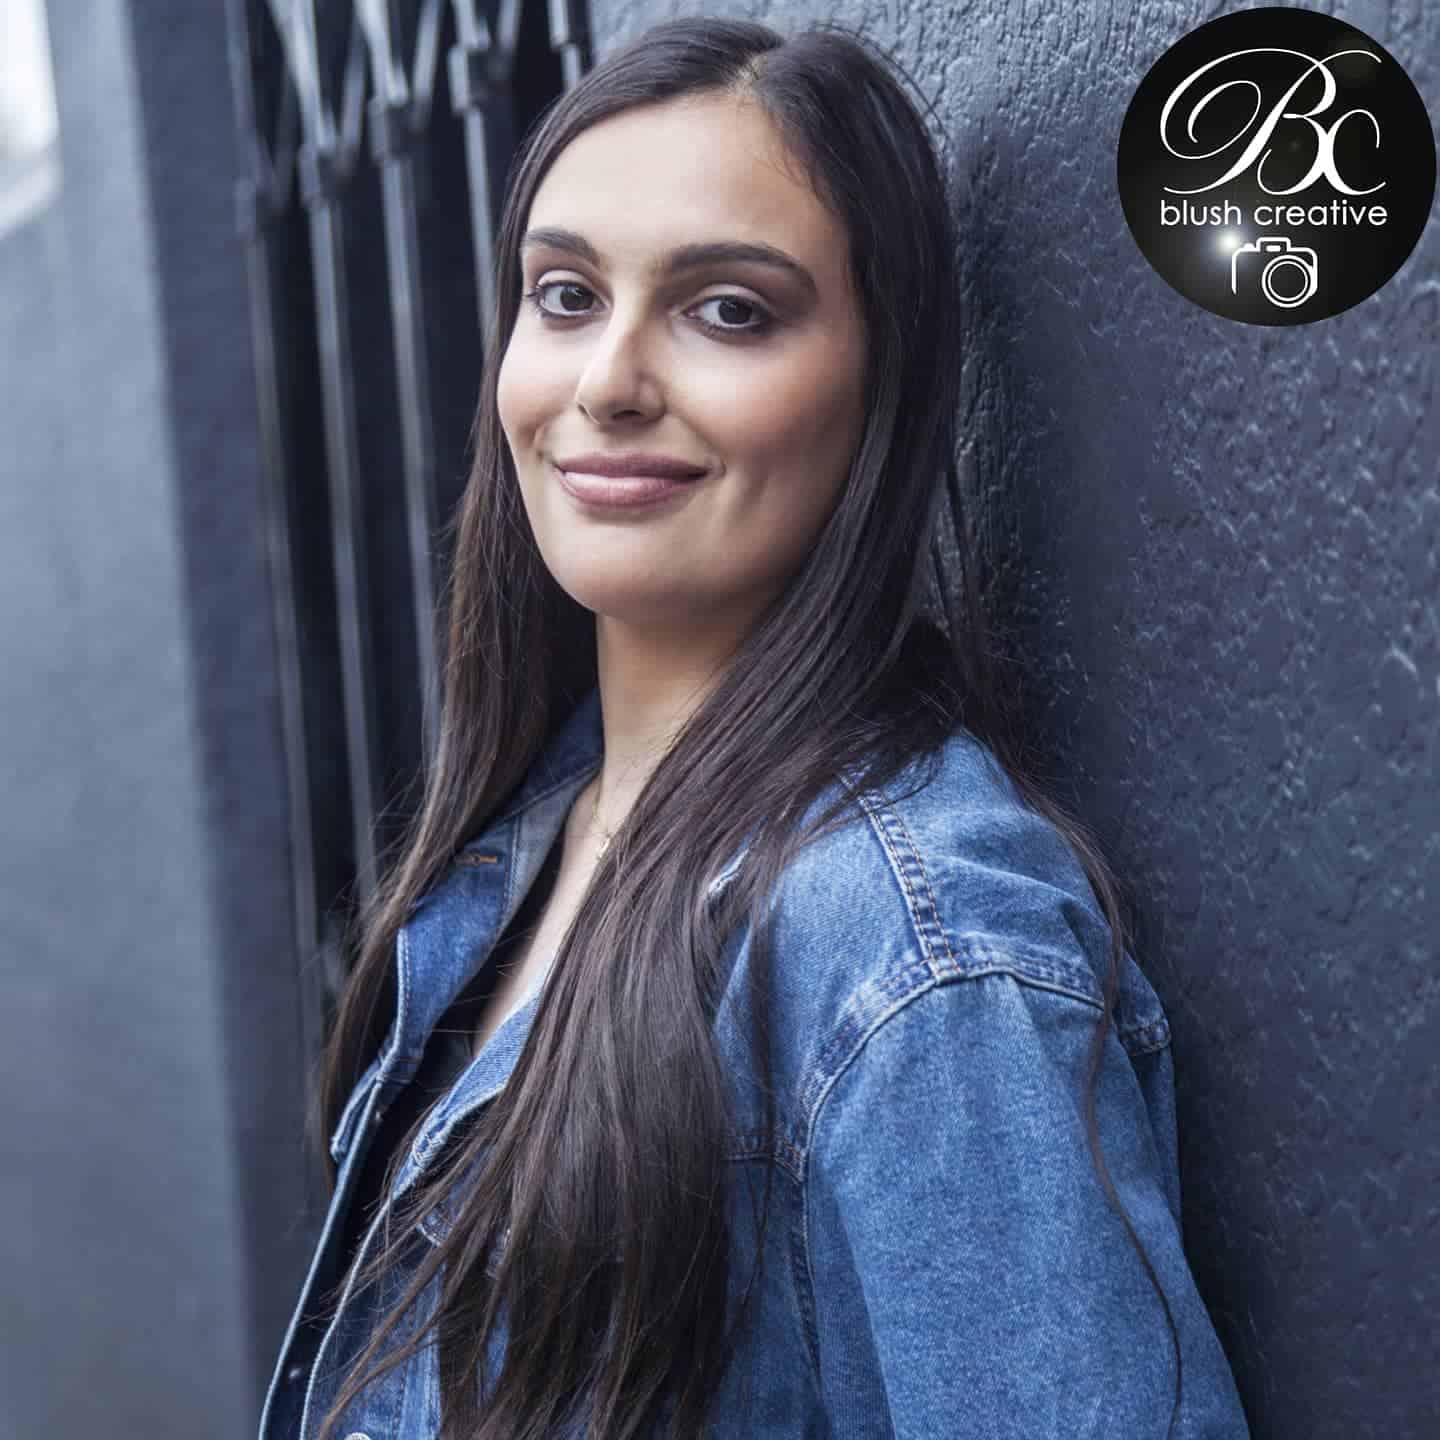 📷 #melbourne - Creative and artistic professional photography for #musicians #artists #performers #singers #bands #influencers #actors and more!  📷  #photography #headshots #musicianheadshots #albumcover #music #profilephoto #professionalphotographers #photoshoot #melbournephotography

Photo shoot inquiries:
📧 info@blush.com.au
or ☎️ (03) 9826 8655.
Website: www.blush.com.au

Recent Client Profile: Monique Raso is a talented 15 year old Sydney #singer #songwriter who won the Stage Door #singing competition last year. @moniqueraso would love for you all to check out her newest single Night! 🎤 https://ditto.fm/night-monique-raso 
#stagedoorcomp

Beautiful #makeup and #hair by @makrisvicky 💄👄 #MUHA

Shot on location at @studio_loft_photography